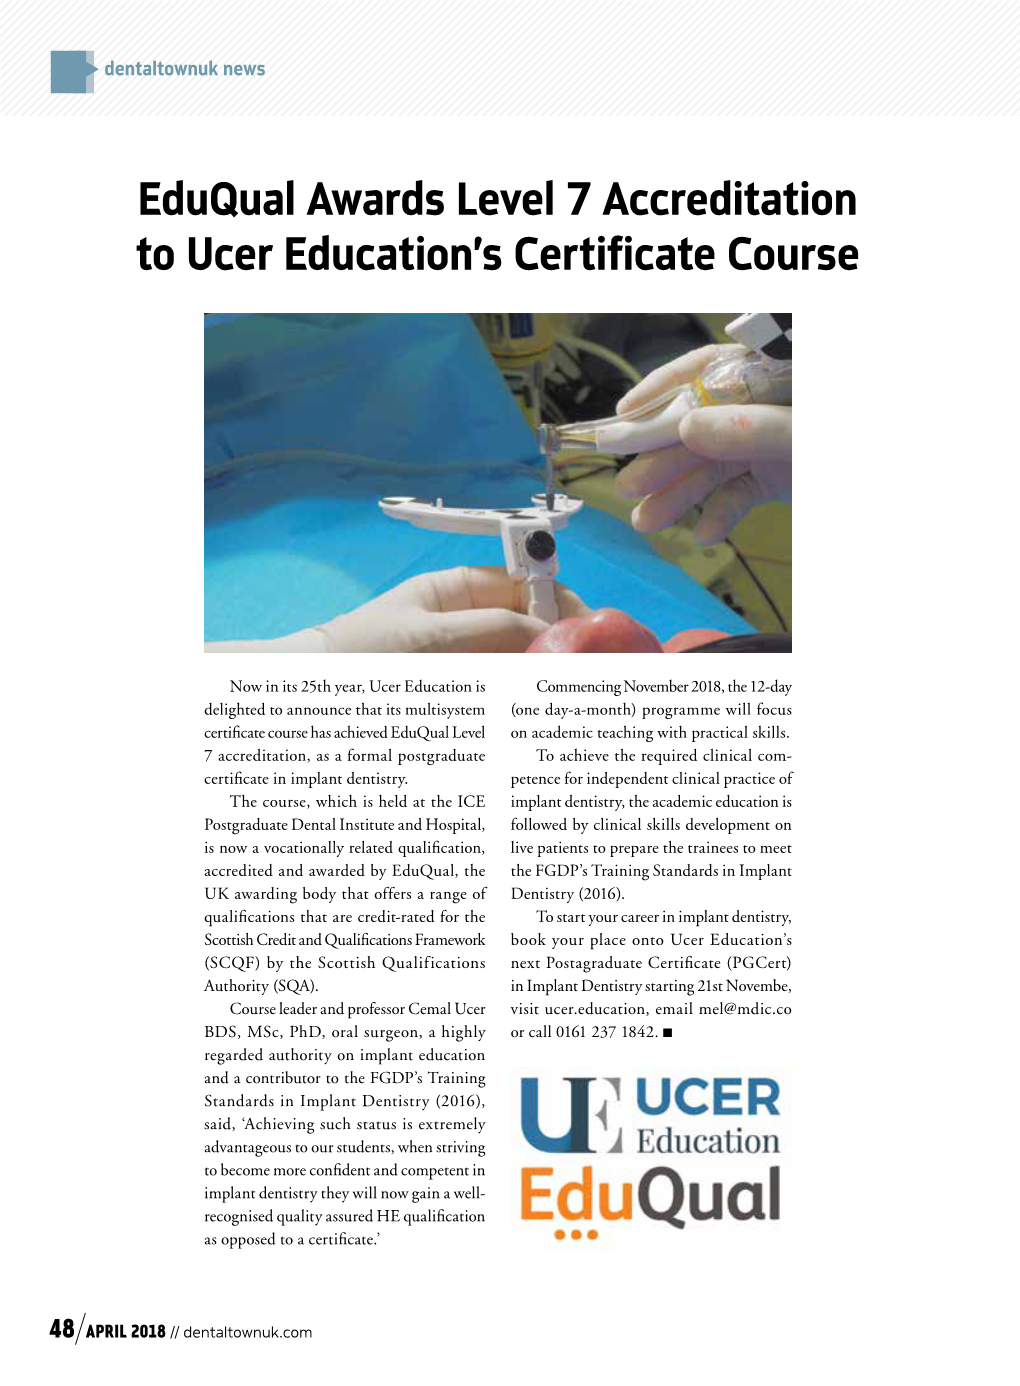 Eduqual Awards Level 7 Accreditation to Ucer Education's Certificate